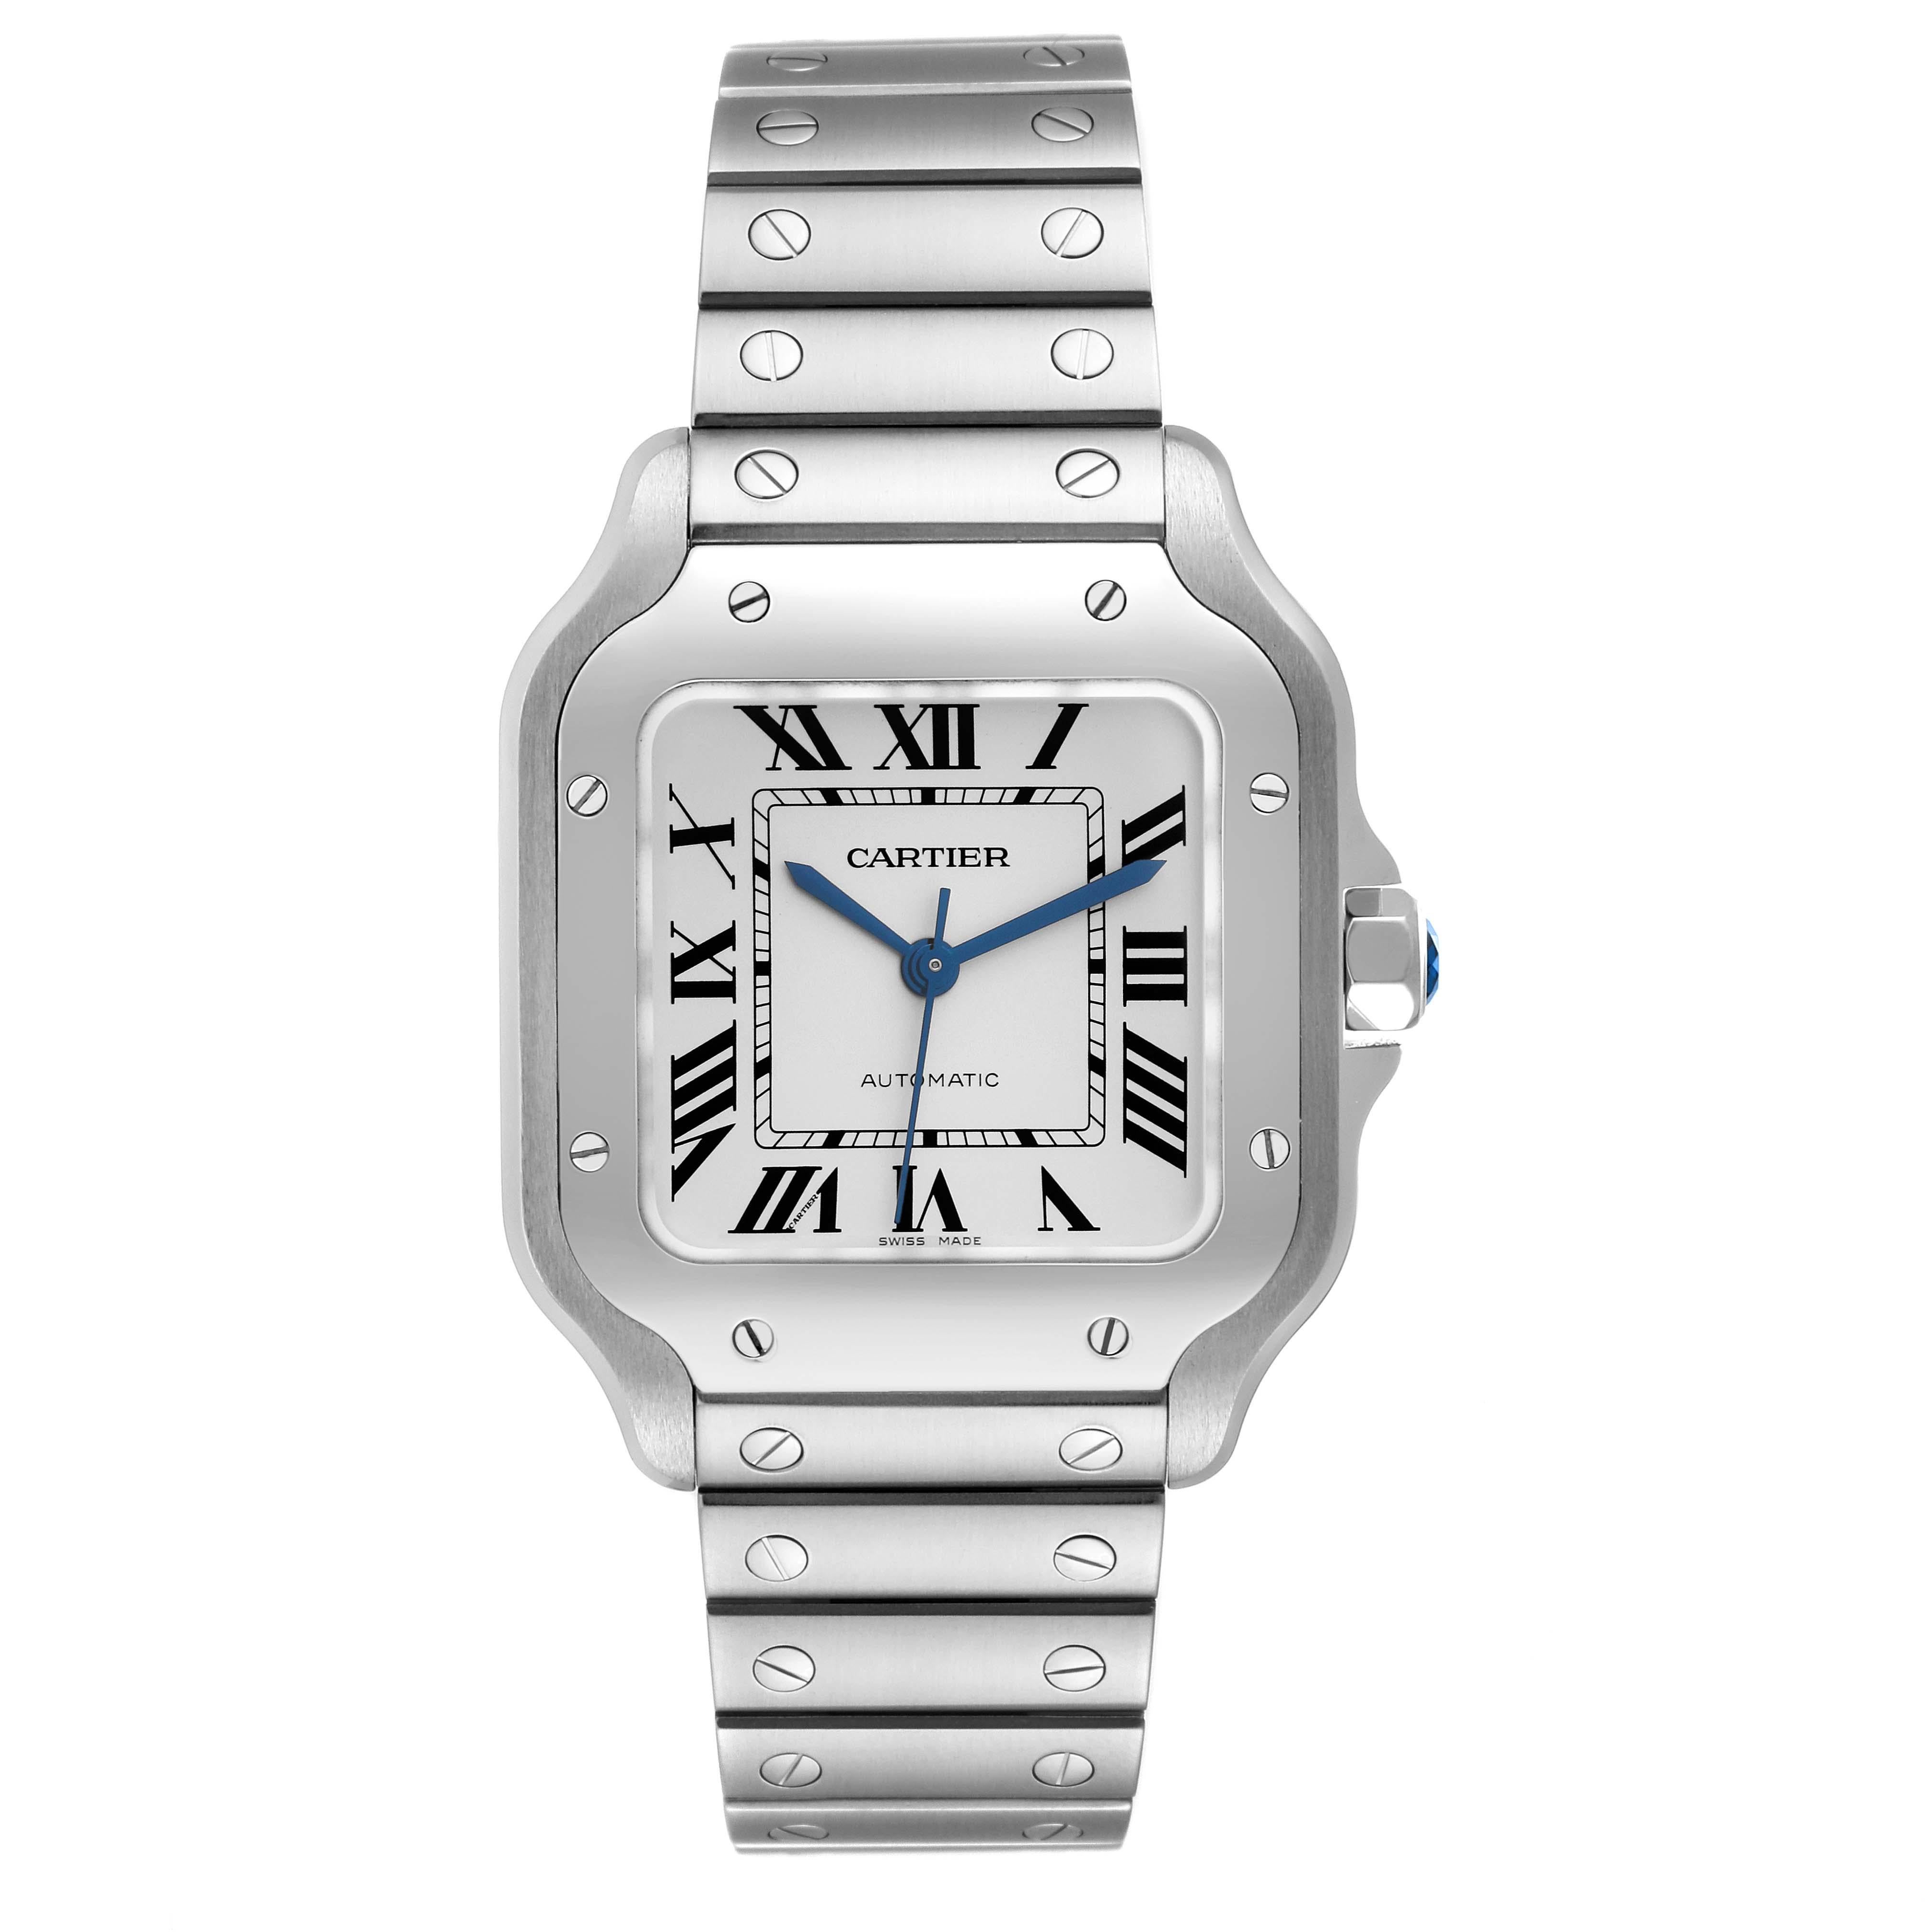 Cartier Santos Silver Dial Medium Steel Mens Watch WSSA0029 Card. Automatic self-winding movement. Stainless steel case 35.1 x 35.1 mm.  Octagonal crown set with the faceted blue spinel. Stainless steel bezel punctuated with 8 signature screws.